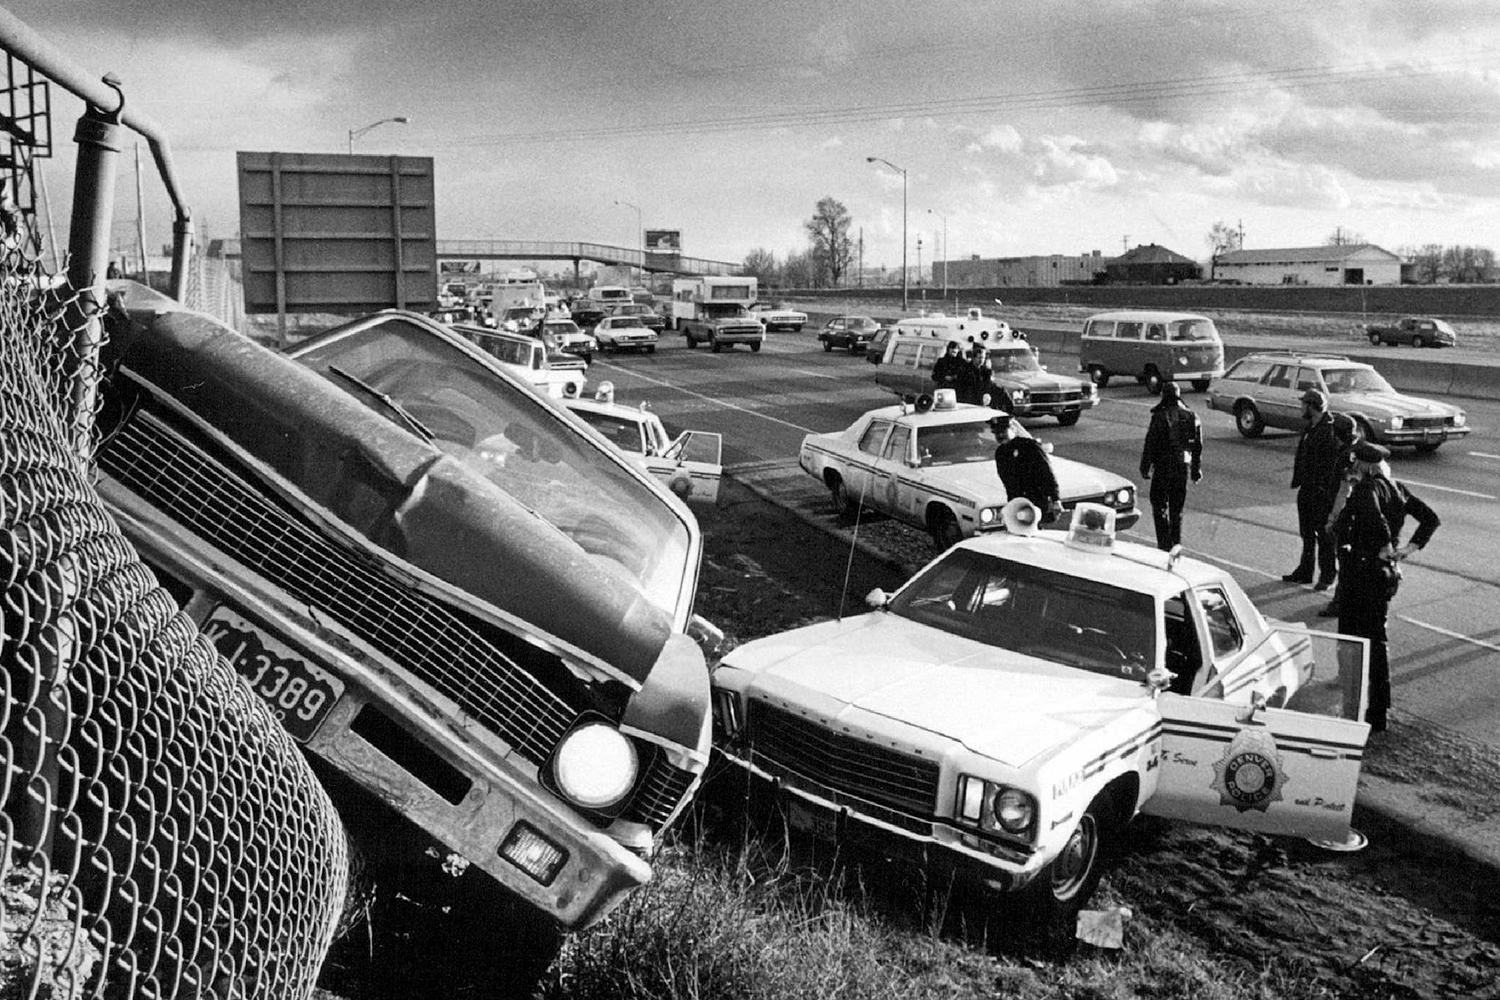 <b>1977:</b> High-speed chases rarely end well. This perp got his car caught in a chain-link fence along an Interstate 25 embankment in Colorado.